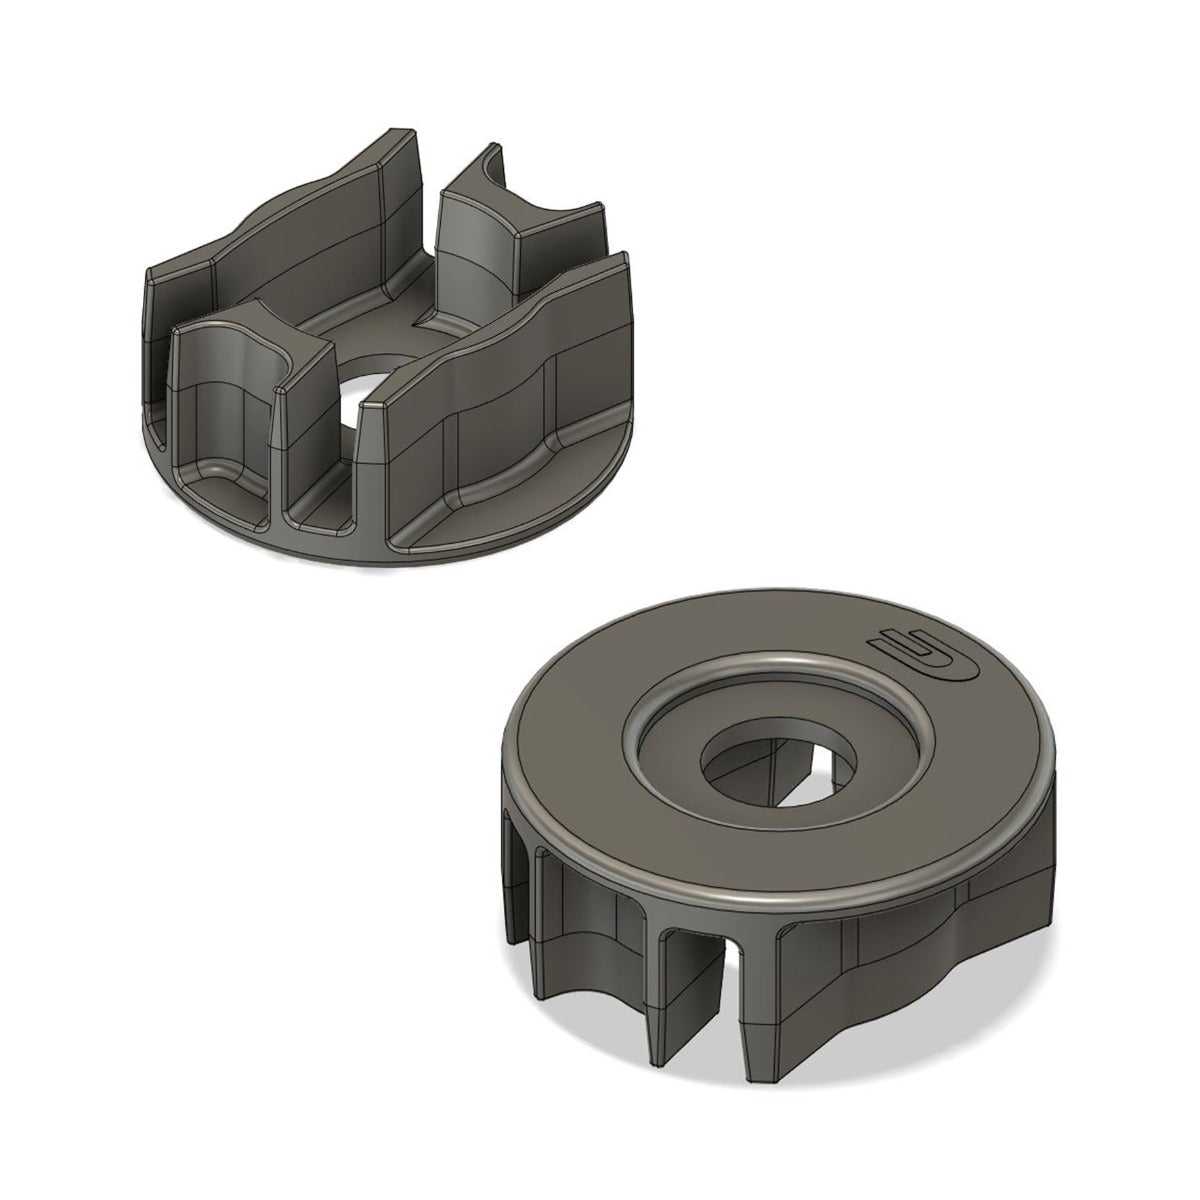 Direnza, Direnza - Audi A4 / S4 / RS4 / B8 / B8.5 09-17 - Rear Differential Mount Inserts